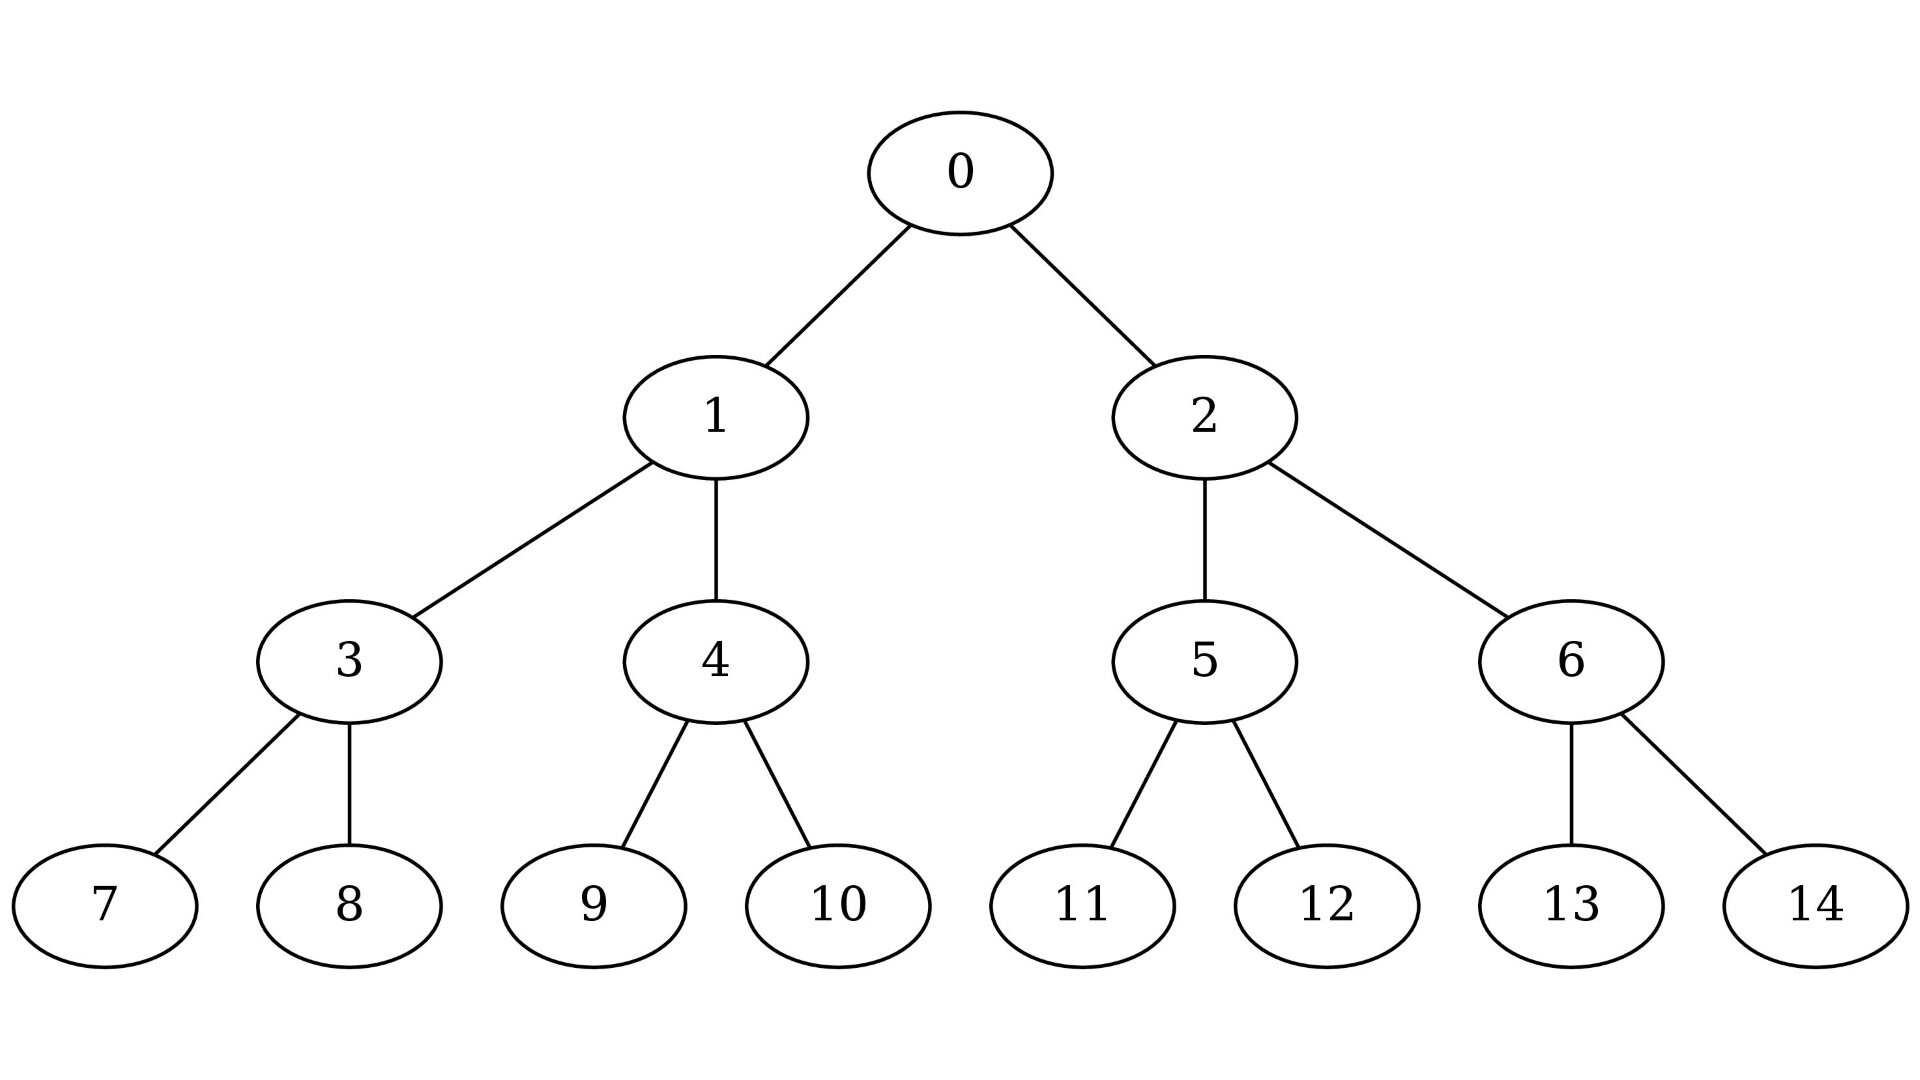 Computing the lowest common ancestor in a full binary tree